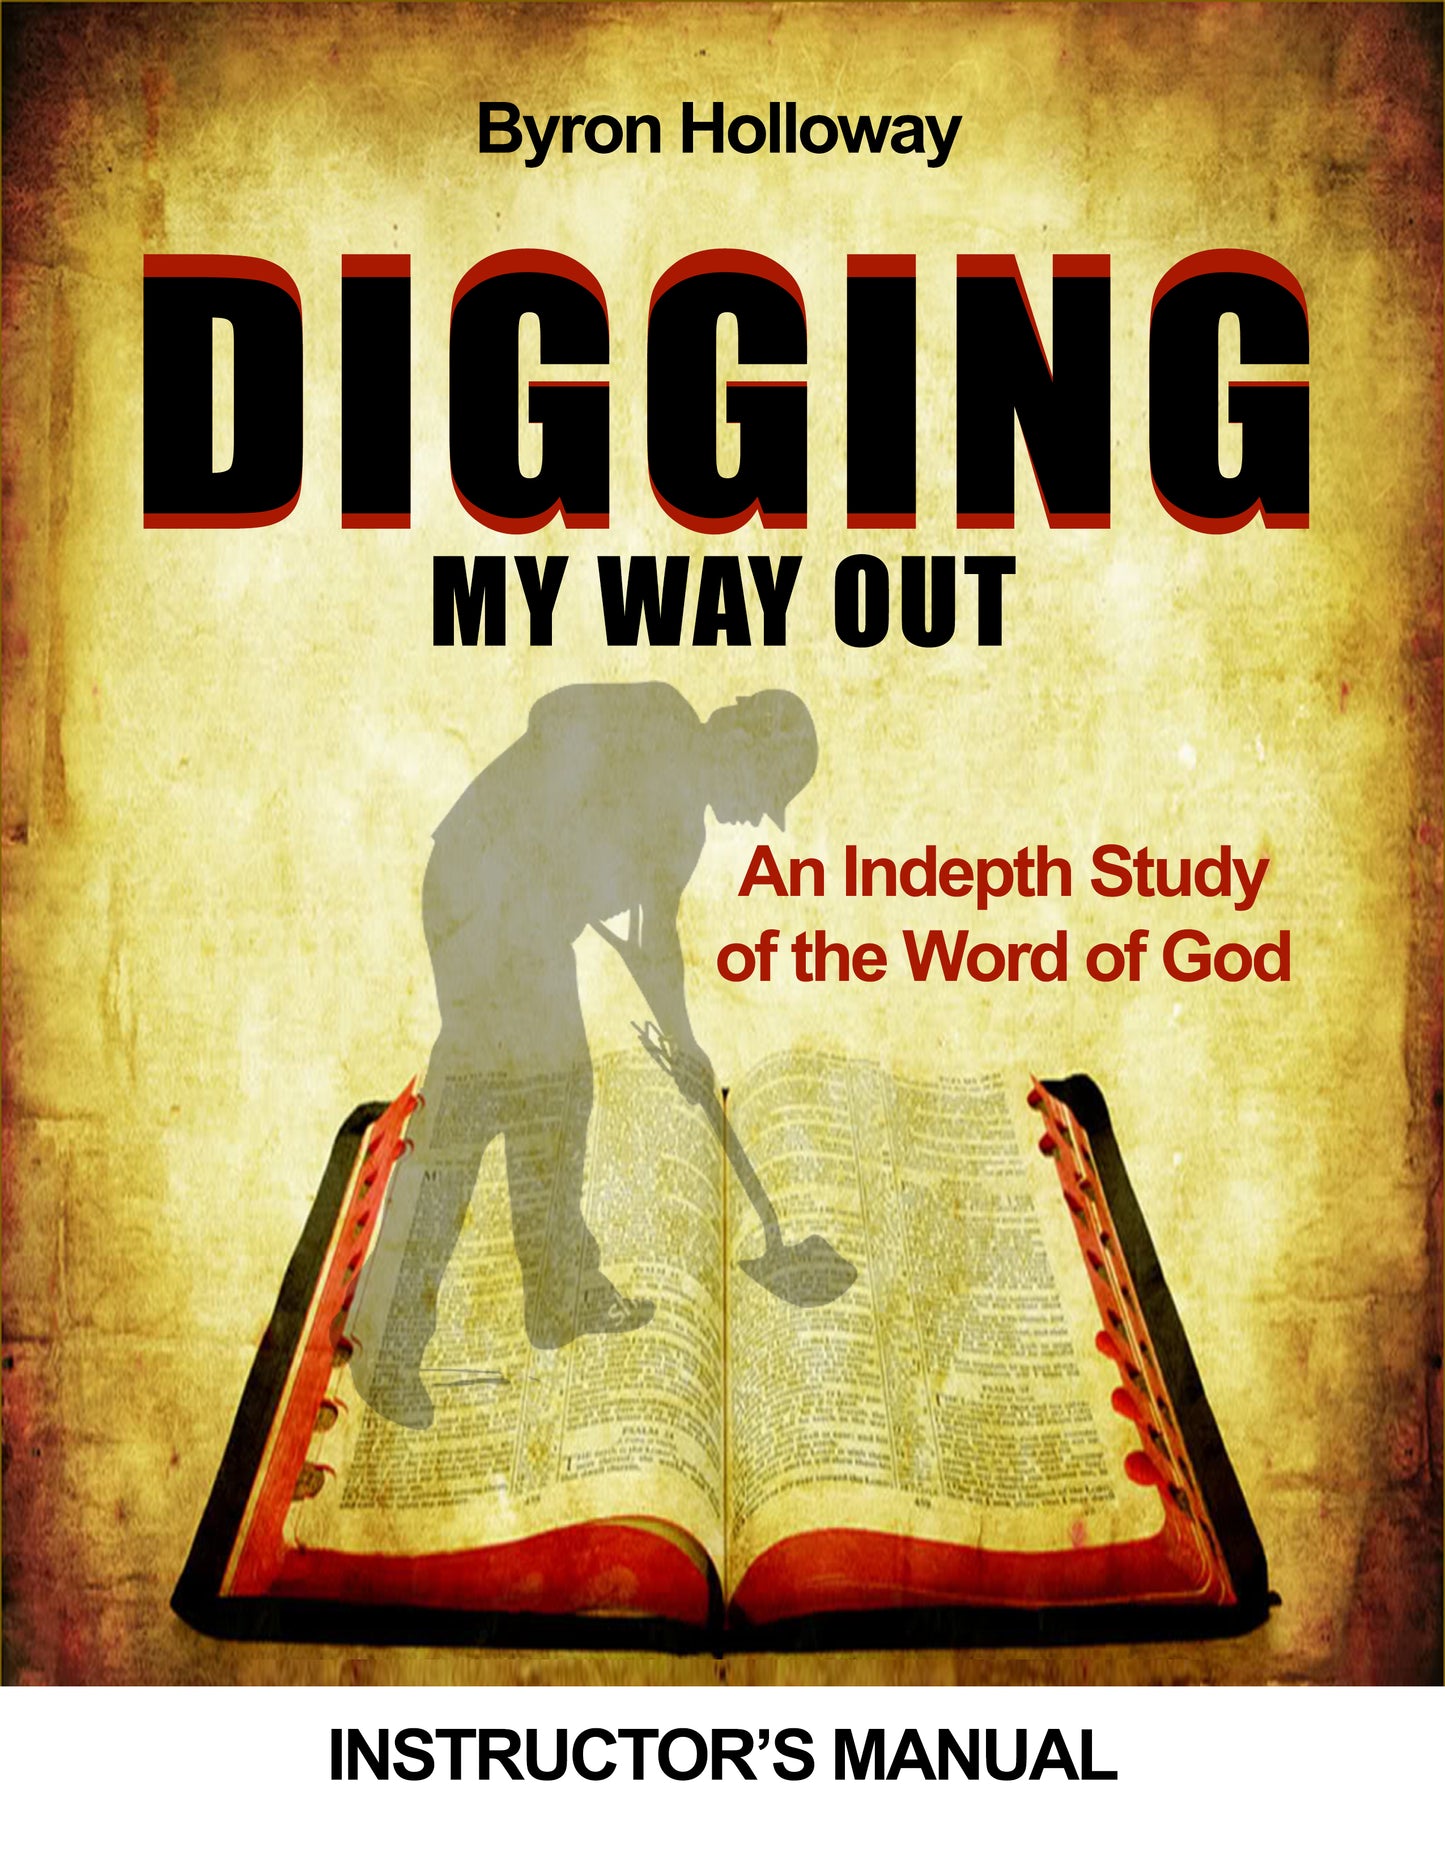 Digging My Way Out Instructor's Manual - Byron Holloway